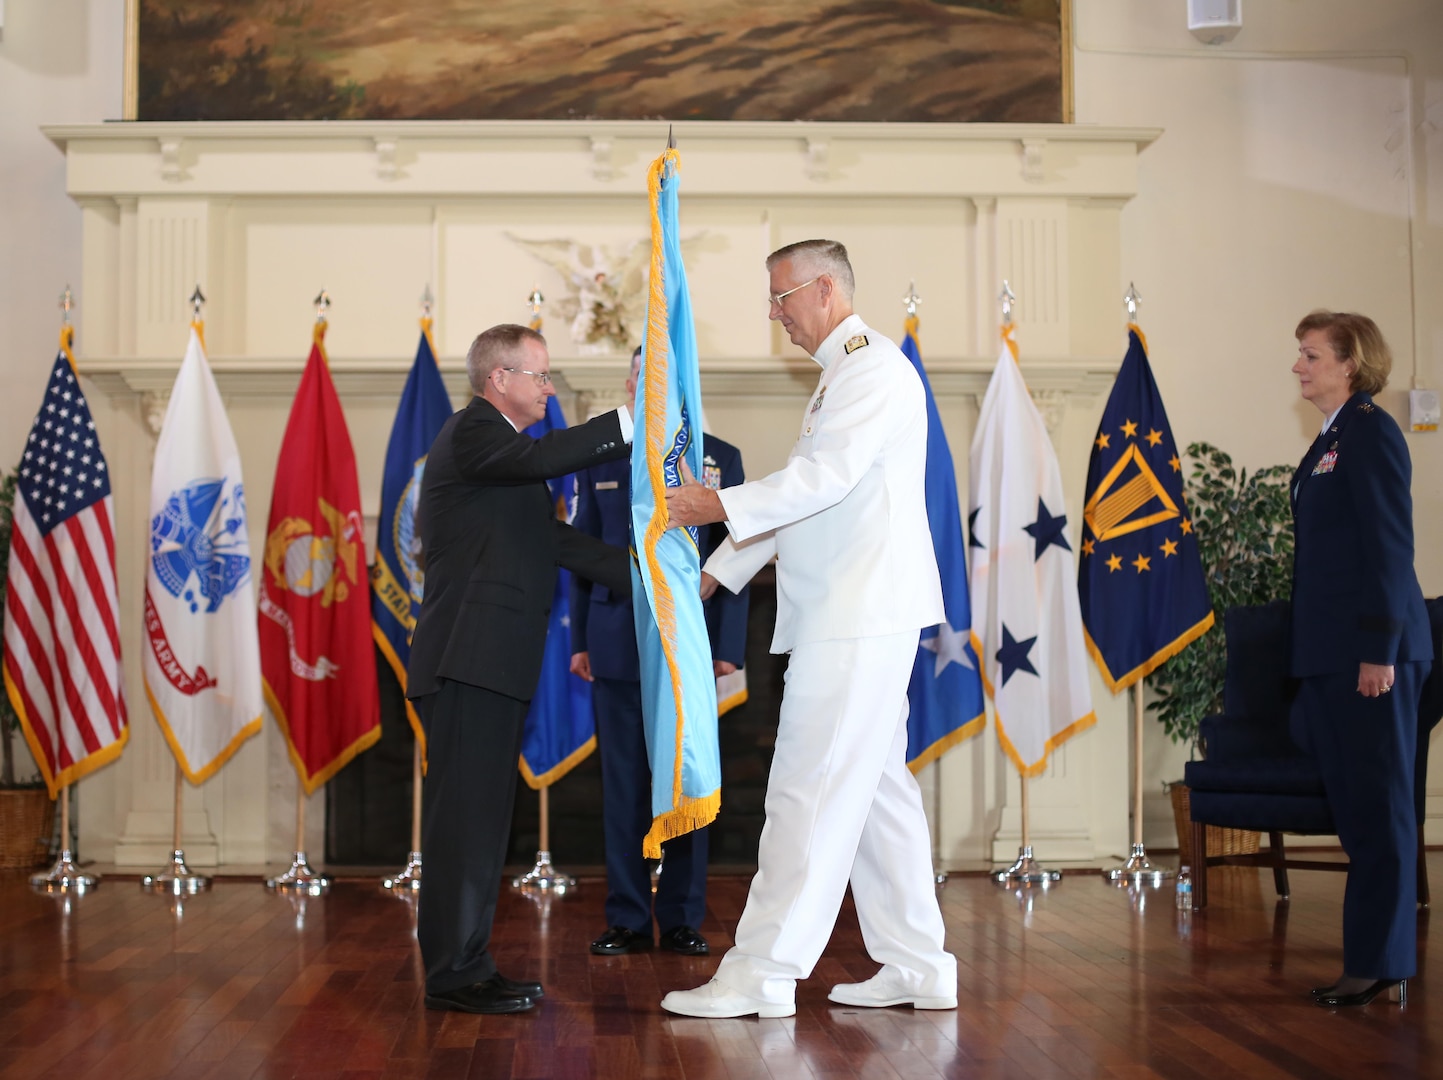 Navy Vice Adm. David H. Lewis receives the Defense Contract Management Agency flag from James MacStravic, performing the duties of  undersecretary of defense for acquisition, technology and logistics, at a May 24 change of command ceremony at Fort Lee, Virginia. Lewis relieves Air Force Lt. Gen. Wendy Masiello as director of Fort Lee-headquartered DCMA and its 12,000 acquisition professionals working out of offices and production
facilities around the world. (DCMA photo by Stephen Hickok)  
